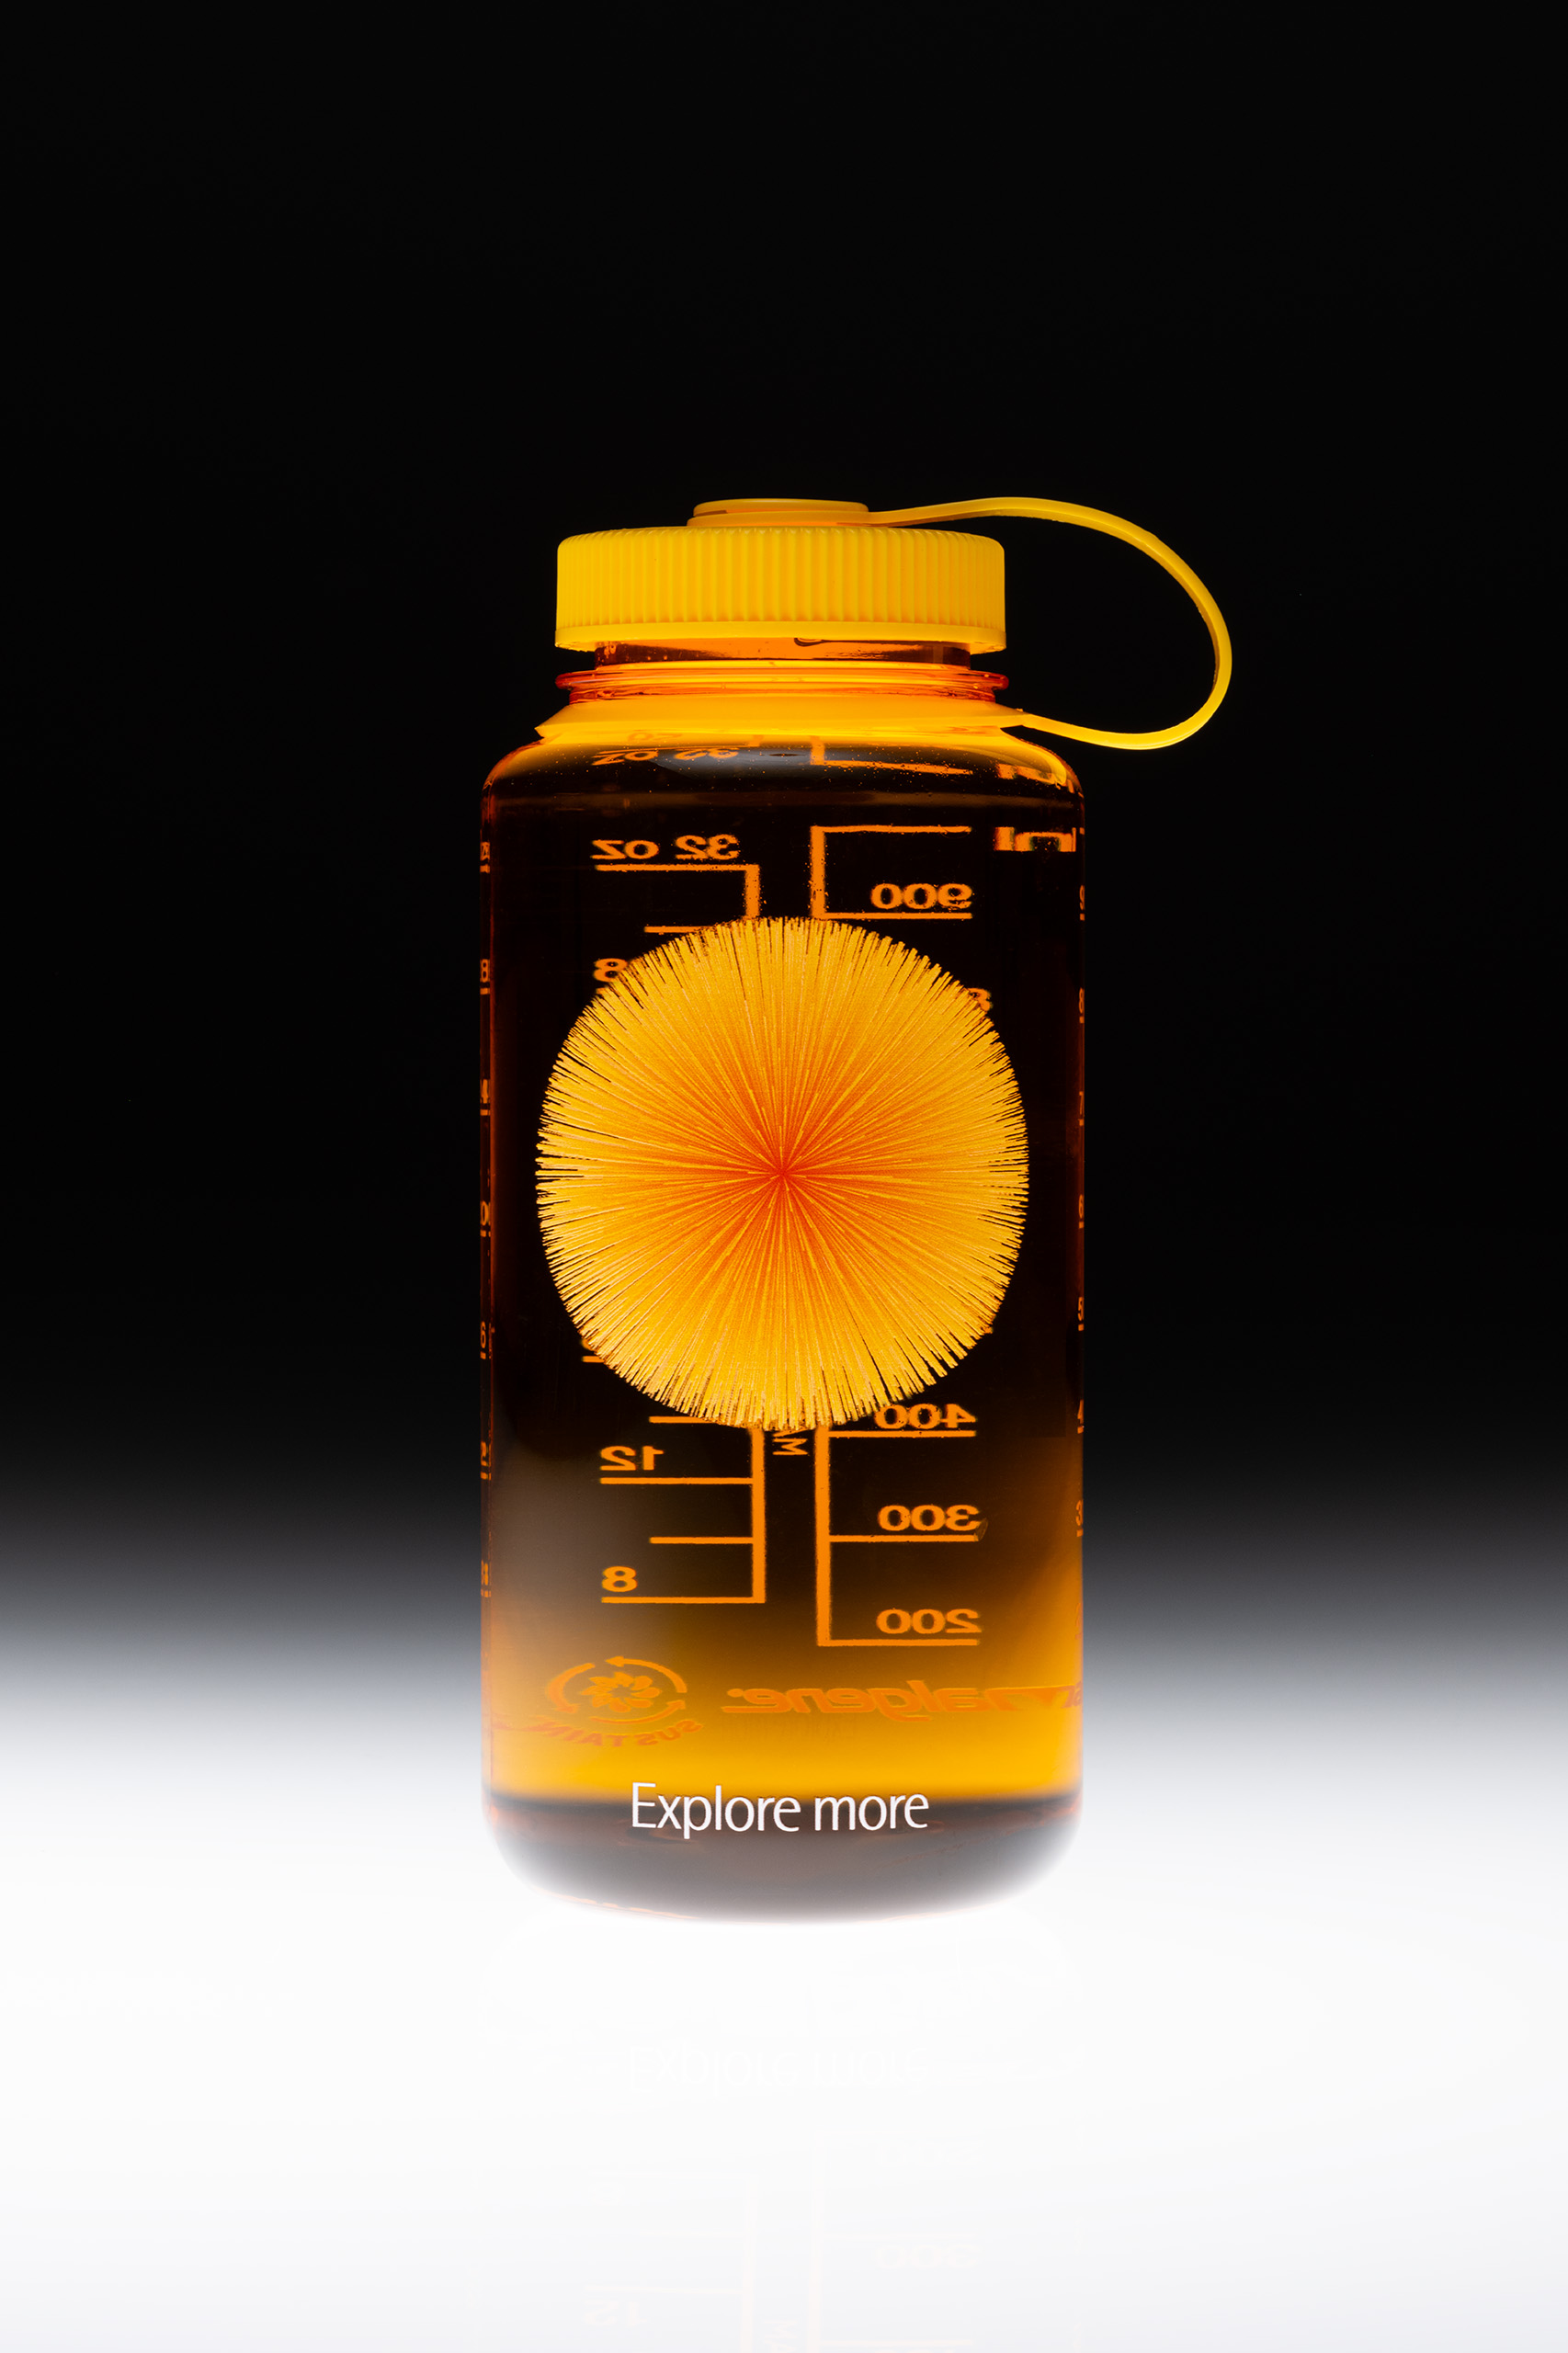 A radiant amber bottle basks in solitude, its visage graced by a geometric burst of sunlight trapped in glass. The vessel, crowned with a vivid yellow cap connected by a loop of the same sunny hue, stands as a beacon against the void. Upon its surface, a symphony of scientific markings—scales, numbers, and lines—whisper the language of precision. Below, a gentle glow casts a soft reflection, as if it’s resting upon the surface of a still midnight lake. Emblazoned at the base, an invitation in white, Explore more, suggests this is but a gateway to a universe of discovery, a single drop in the vast ocean of knowledge.